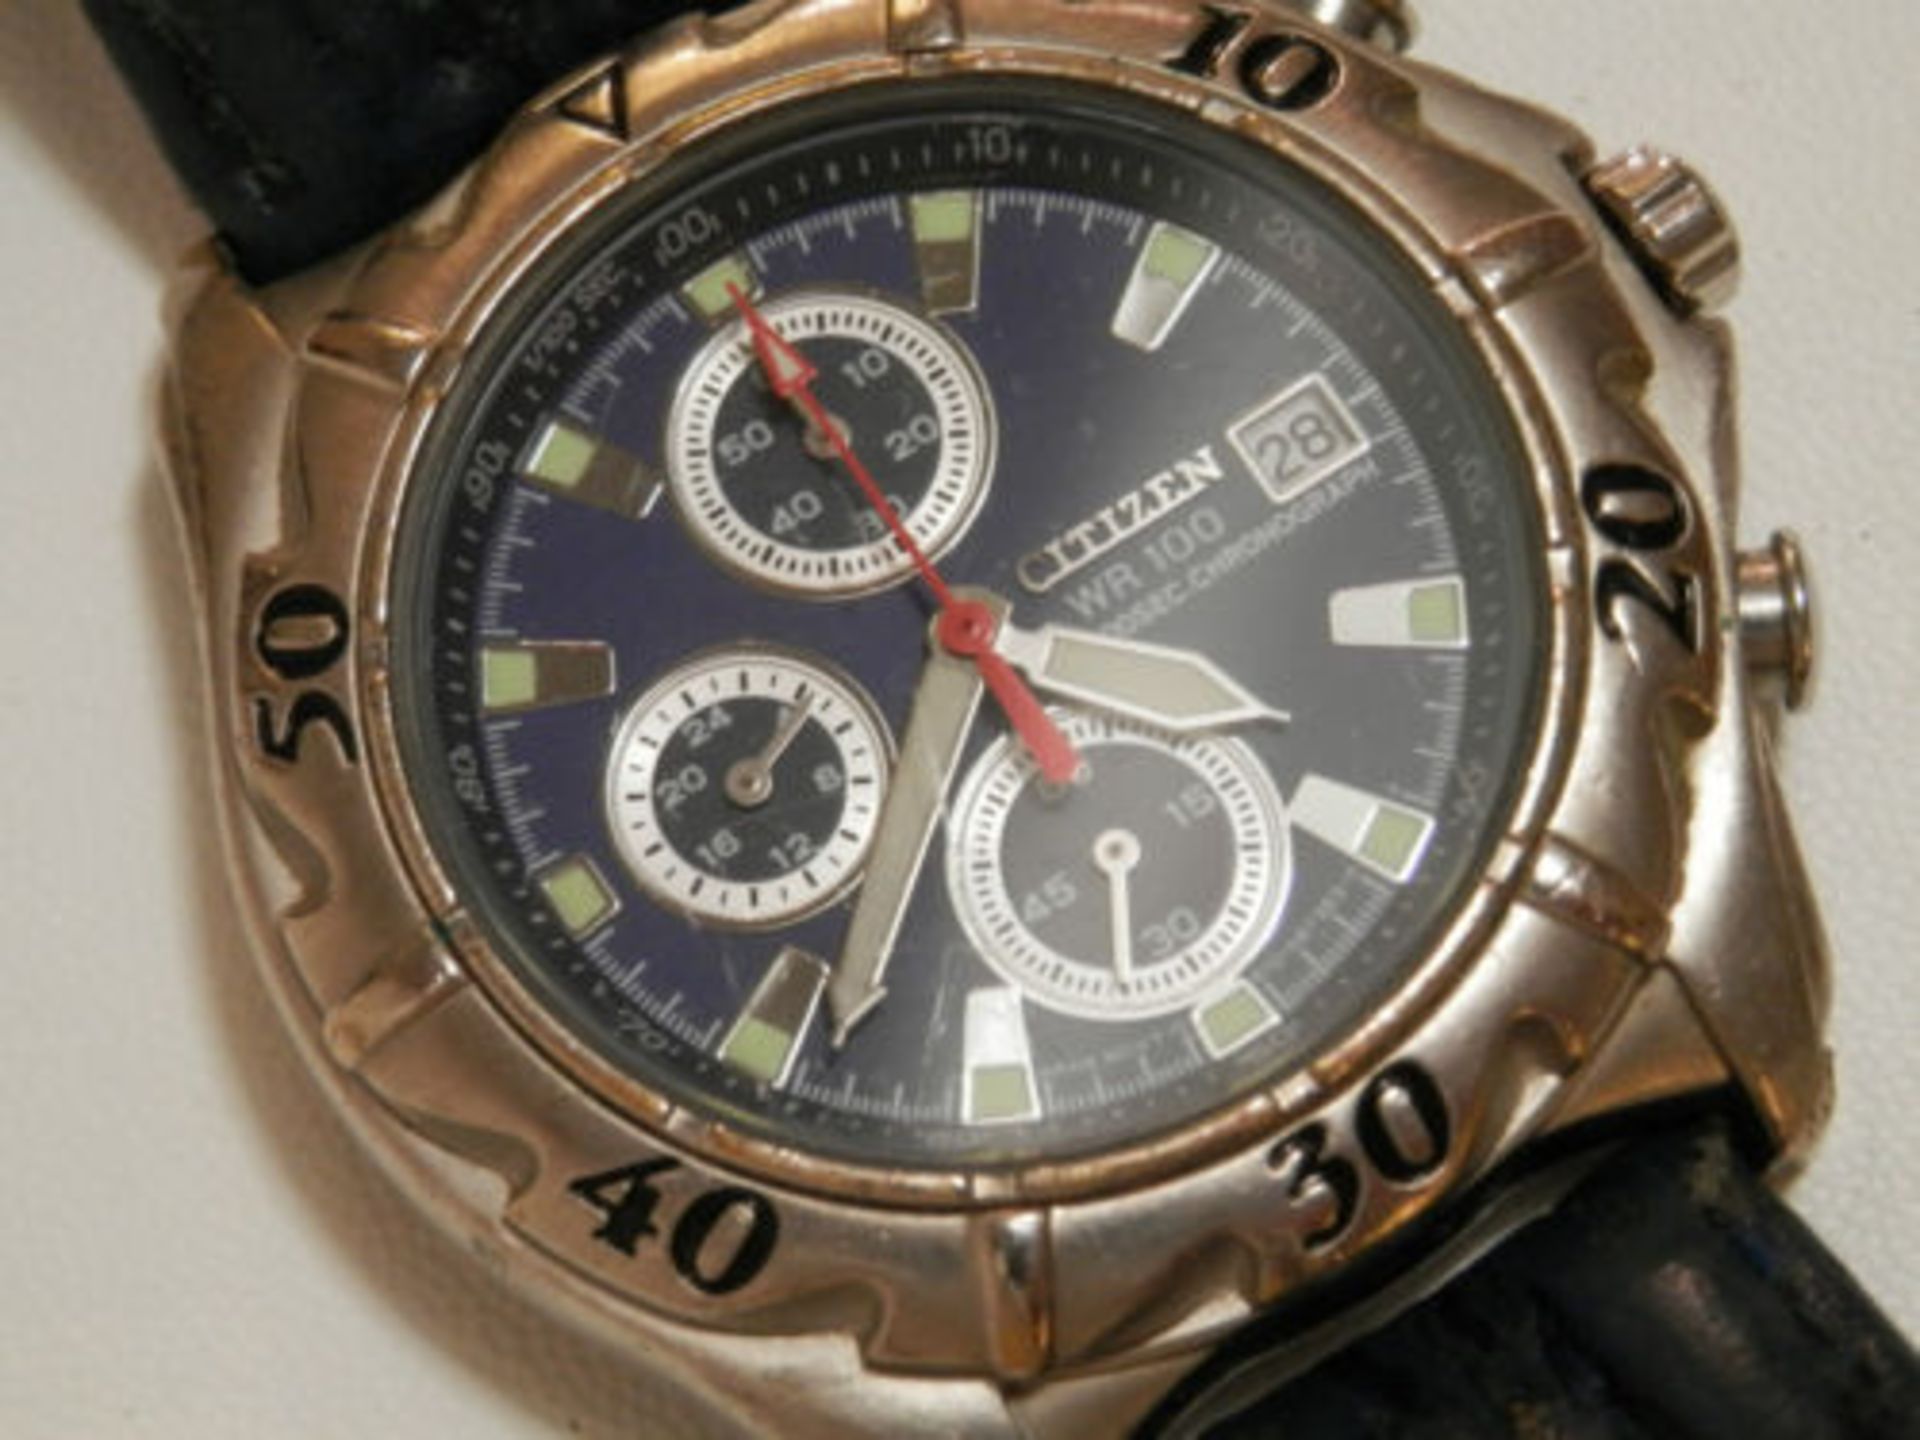 RETRO GENTS GENUINE CITIZEN 1990S MINI DIAL  CHRONOGRAPH DATE WATCH. ALL WORKING       GREAT CLASSIC - Image 3 of 11